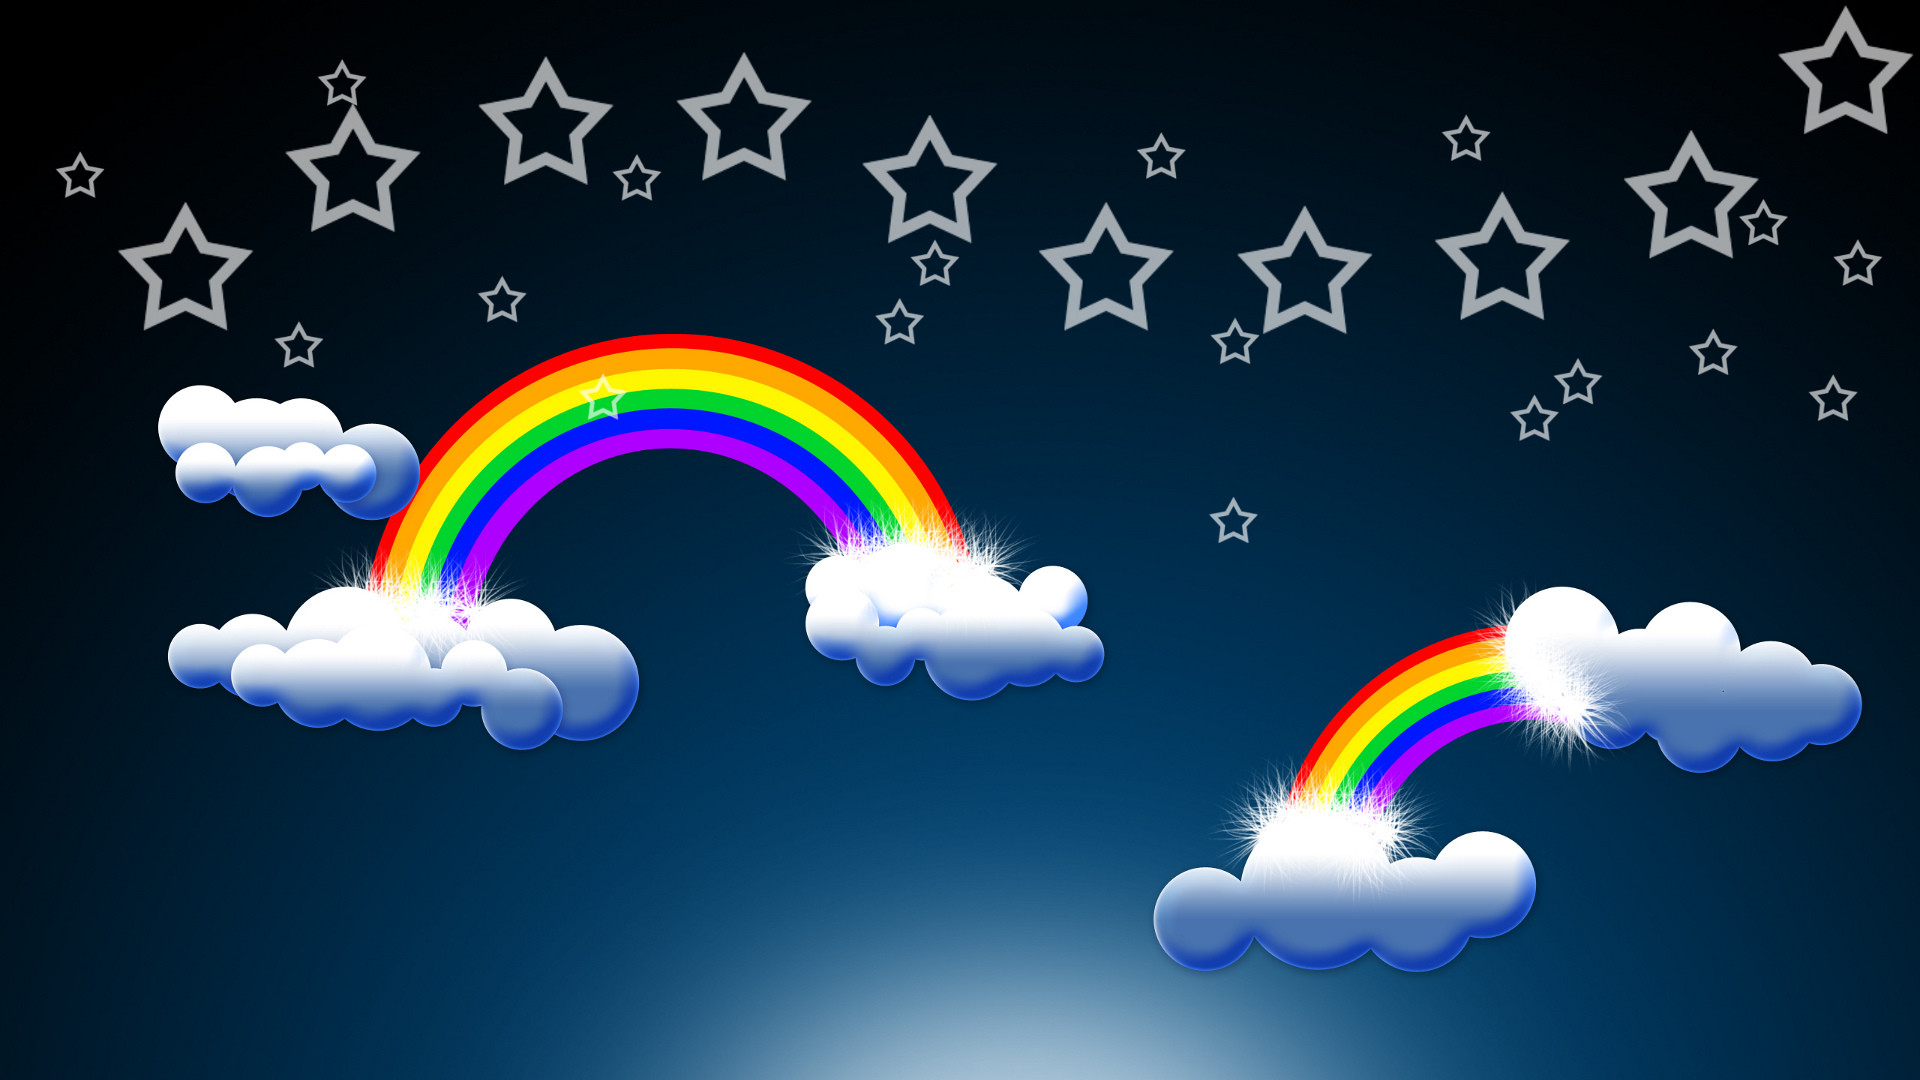 1920x1080 Download: Epic Rainbow and Clouds HD Wallpaper